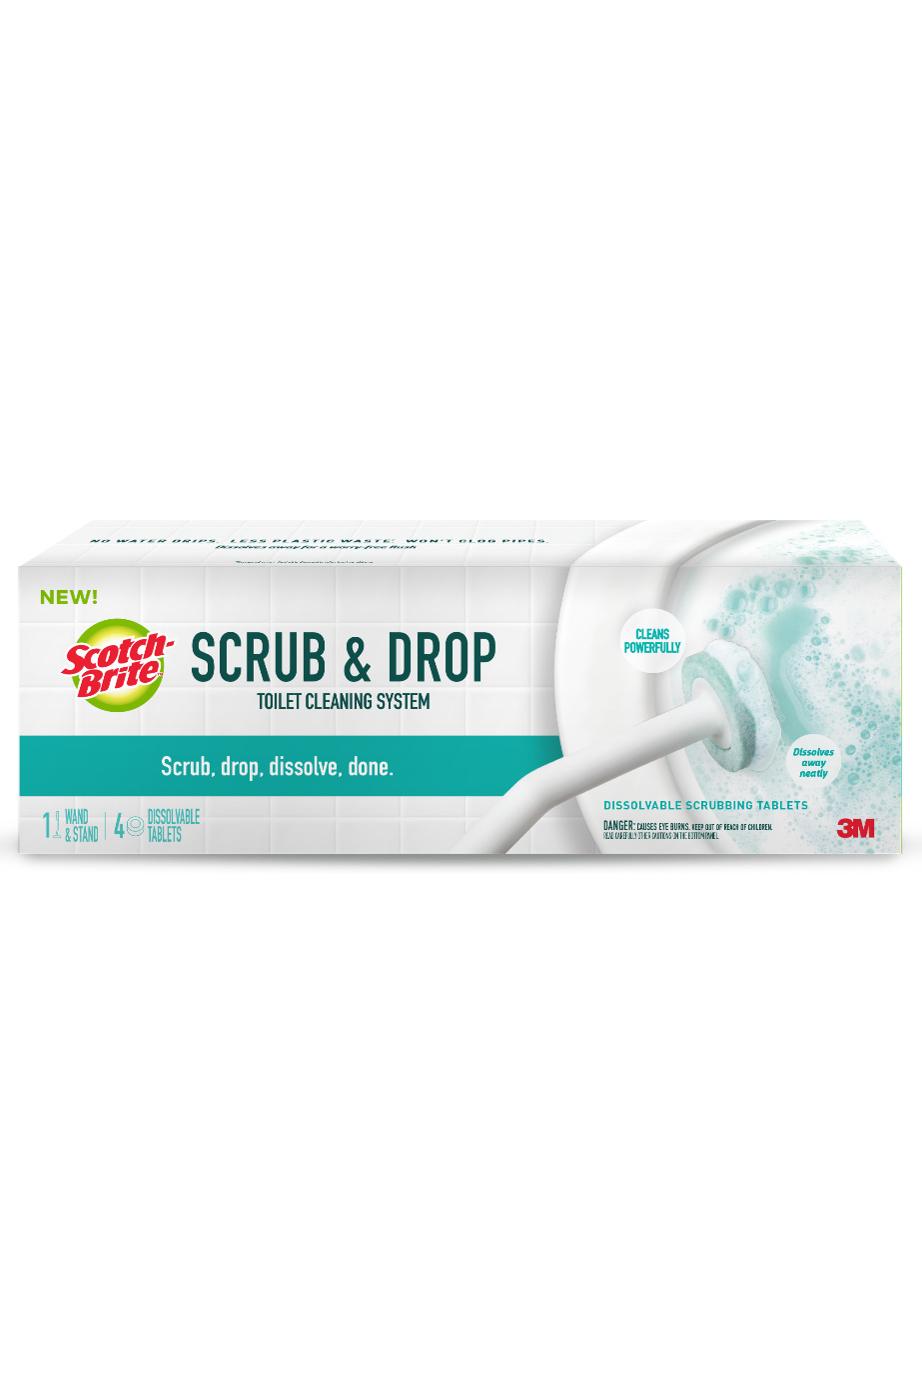 Scotch-Brite Scrub & Drop Toilet Cleaning System; image 1 of 2